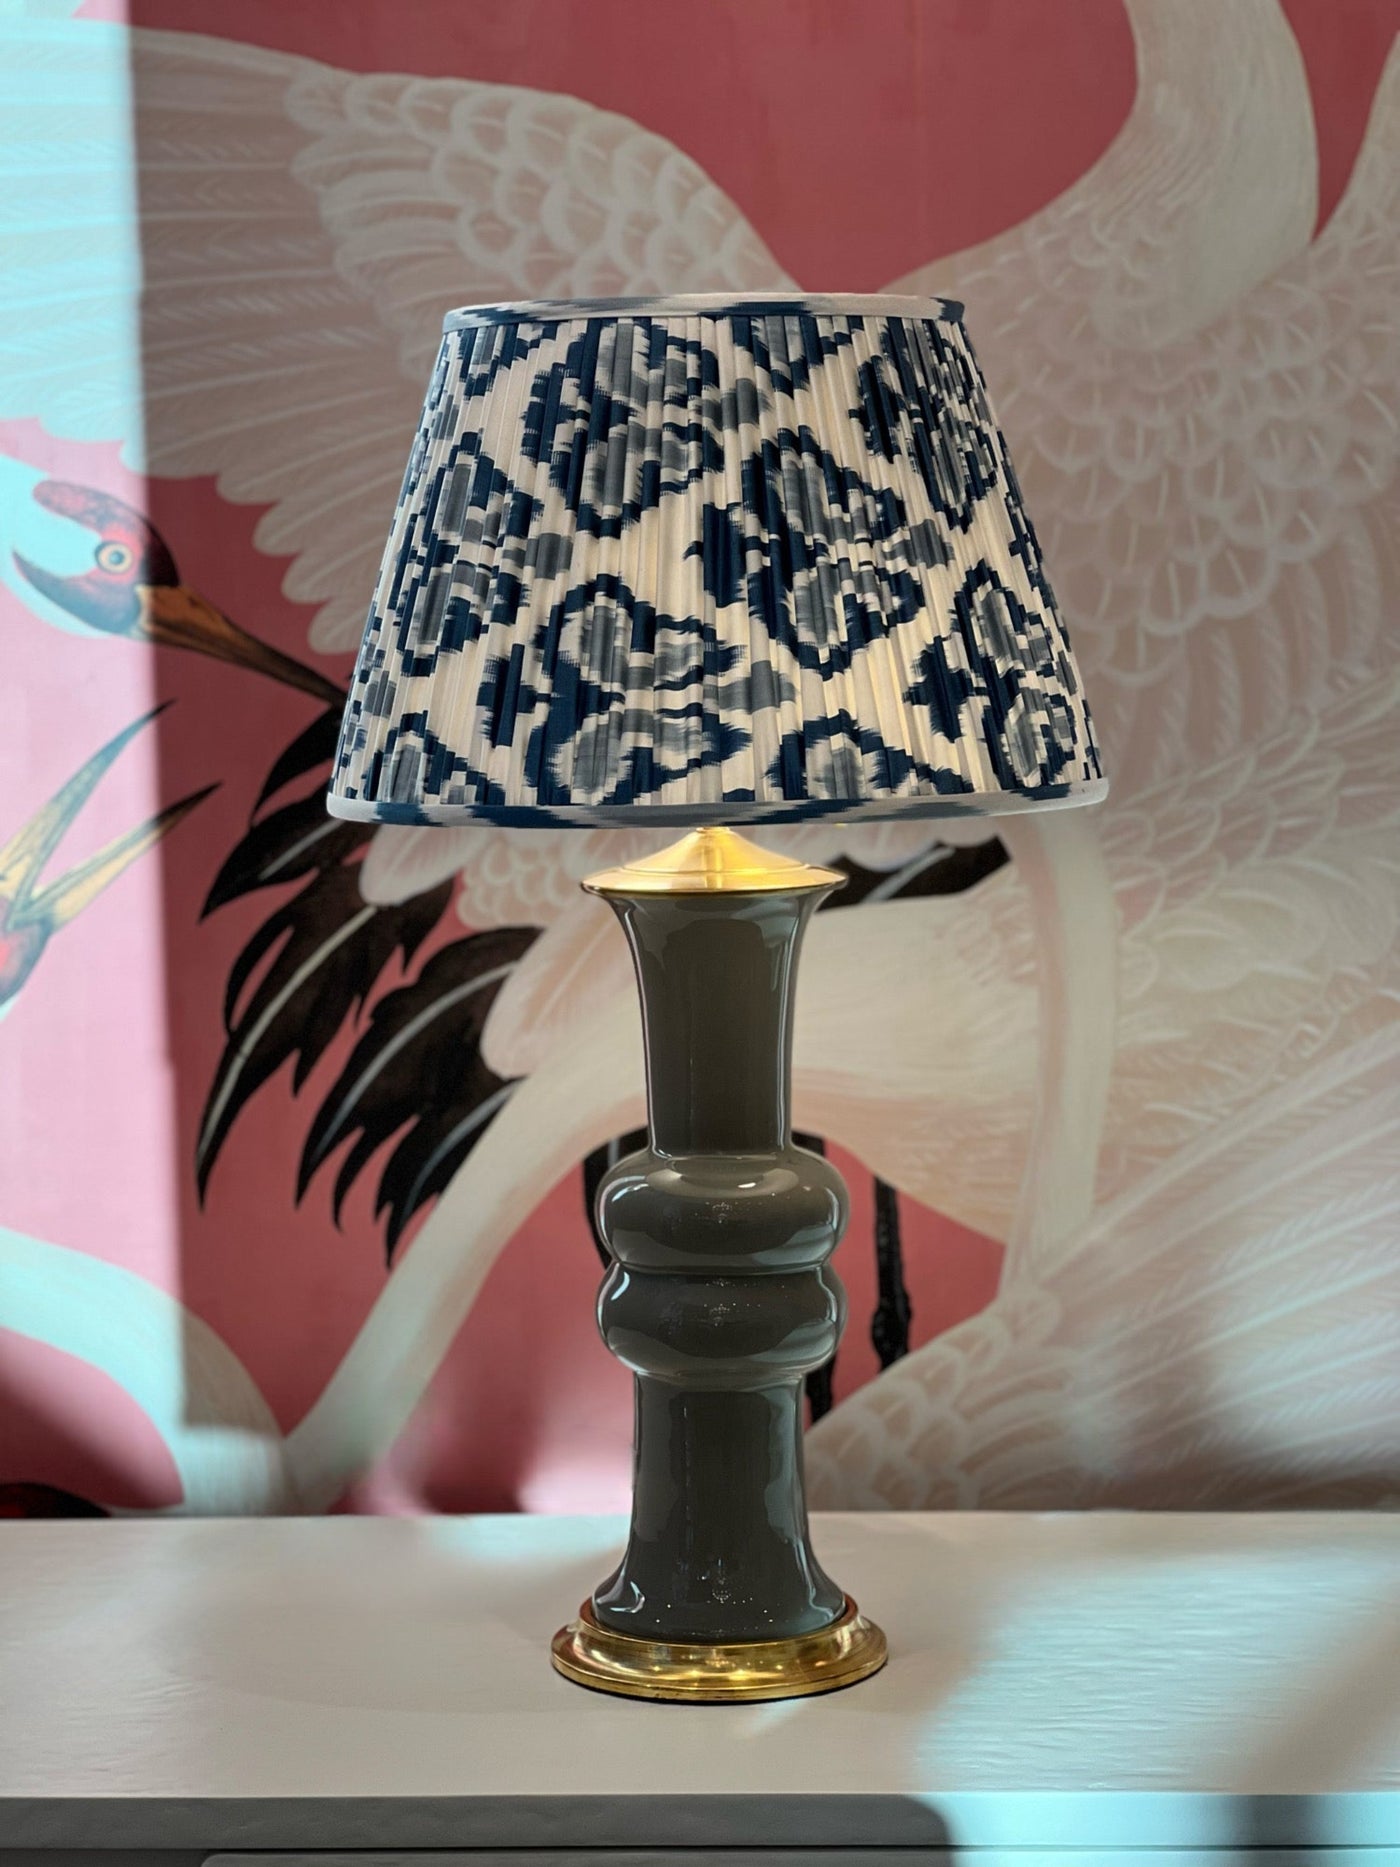 Blue and White ikat lampshade and Christopher Spitzmiller lamp